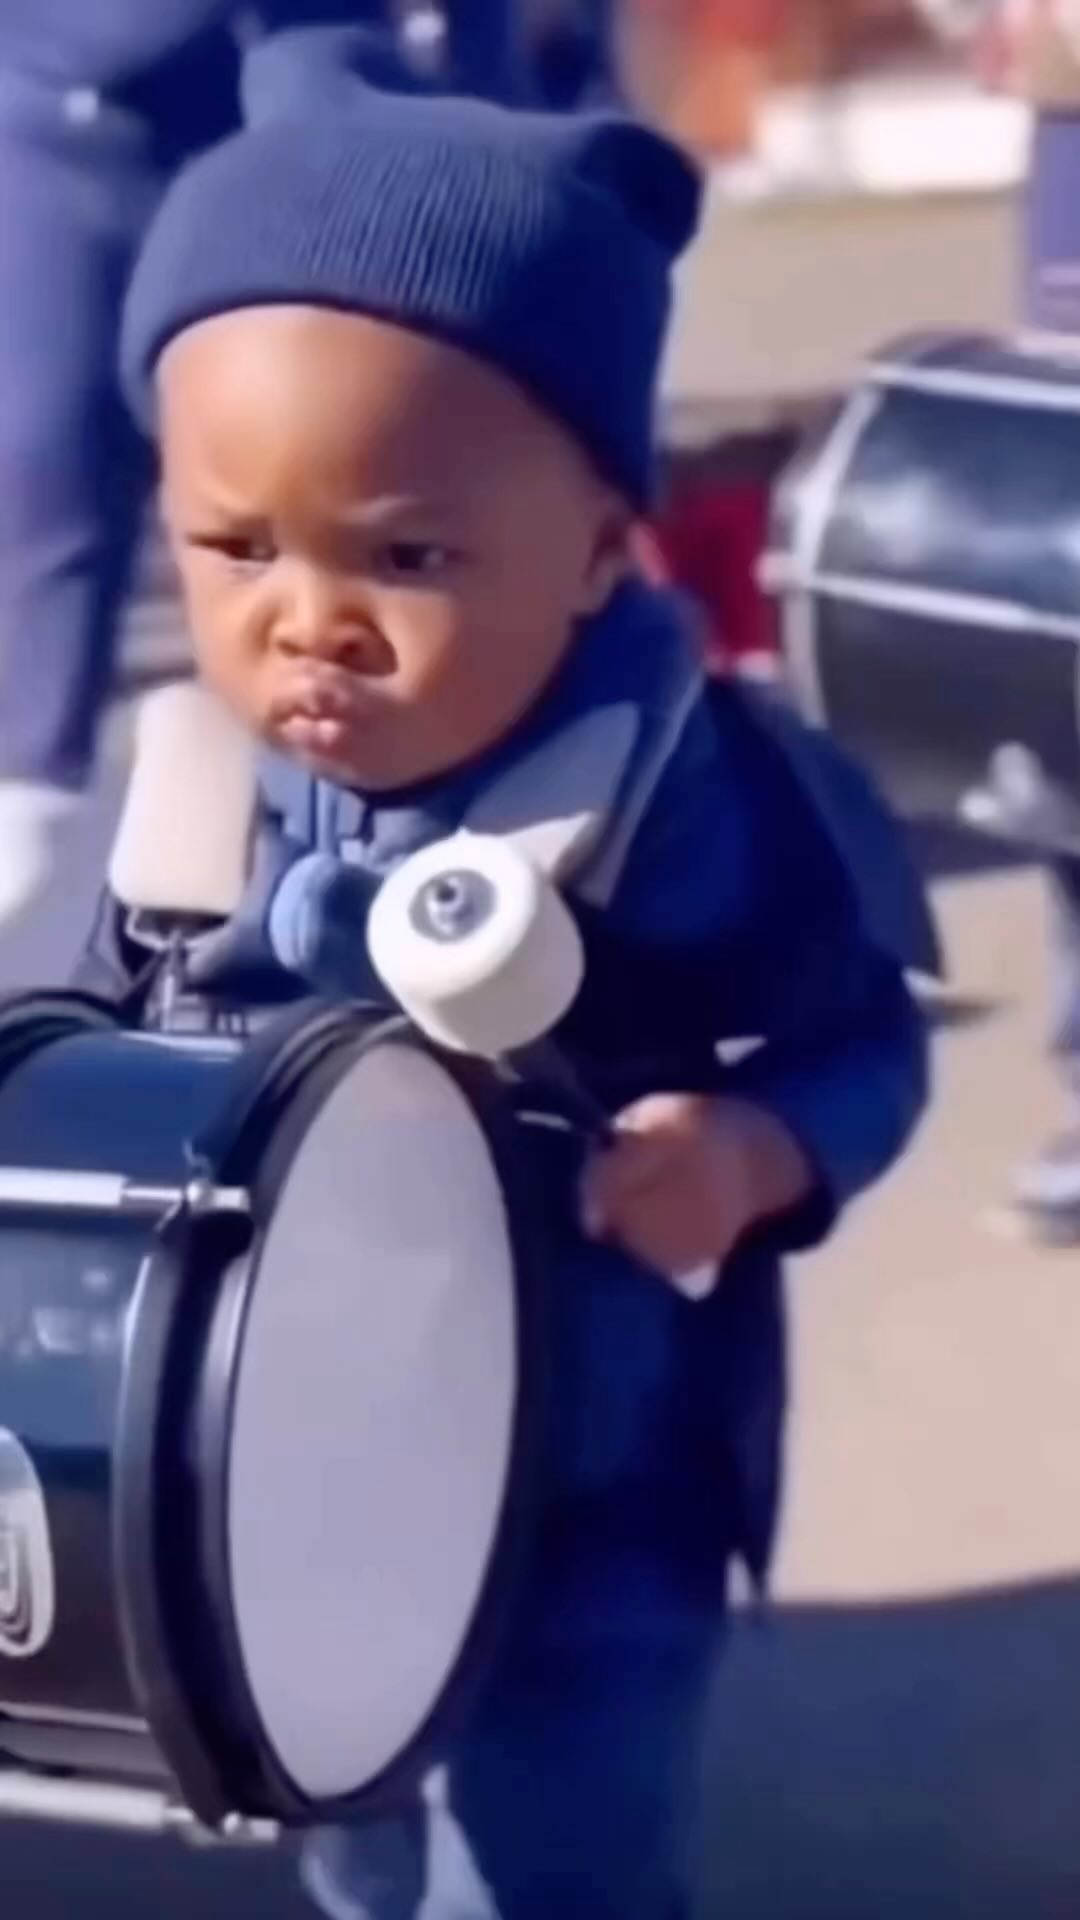 Little drummer baby! He is serious! 

Repost from @atlantadrumacademy
•
This young fella means business !!! #babybassdrummer #drumline #seriousbusiness #drums #drummer #munamommy